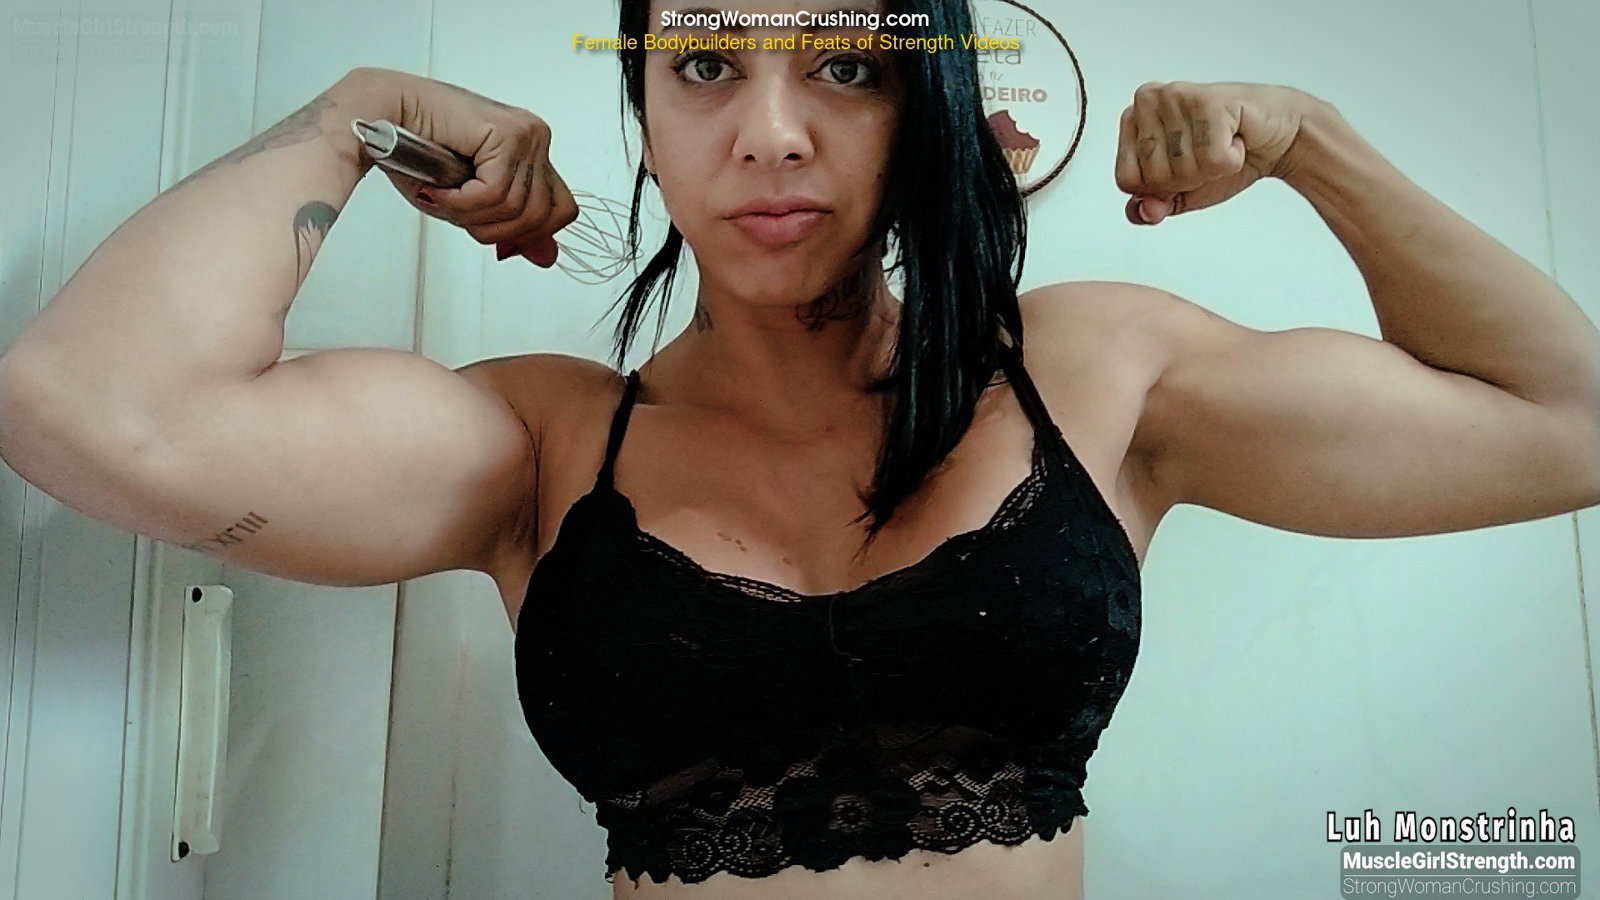 Photo by MusclegirlStrength with the username @MusclegirlStrength, who is a brand user,  May 15, 2024 at 1:12 PM and the text says 'Muscle Goddess Crushes Kitchenware with Insane Strength!: https://www.strongwomancrushing.com/

#musclegirl #musclegirllove #femalemuscle #femalemuscles #featsofstrength #musclepower #strongwomen #barbendingbeasts'